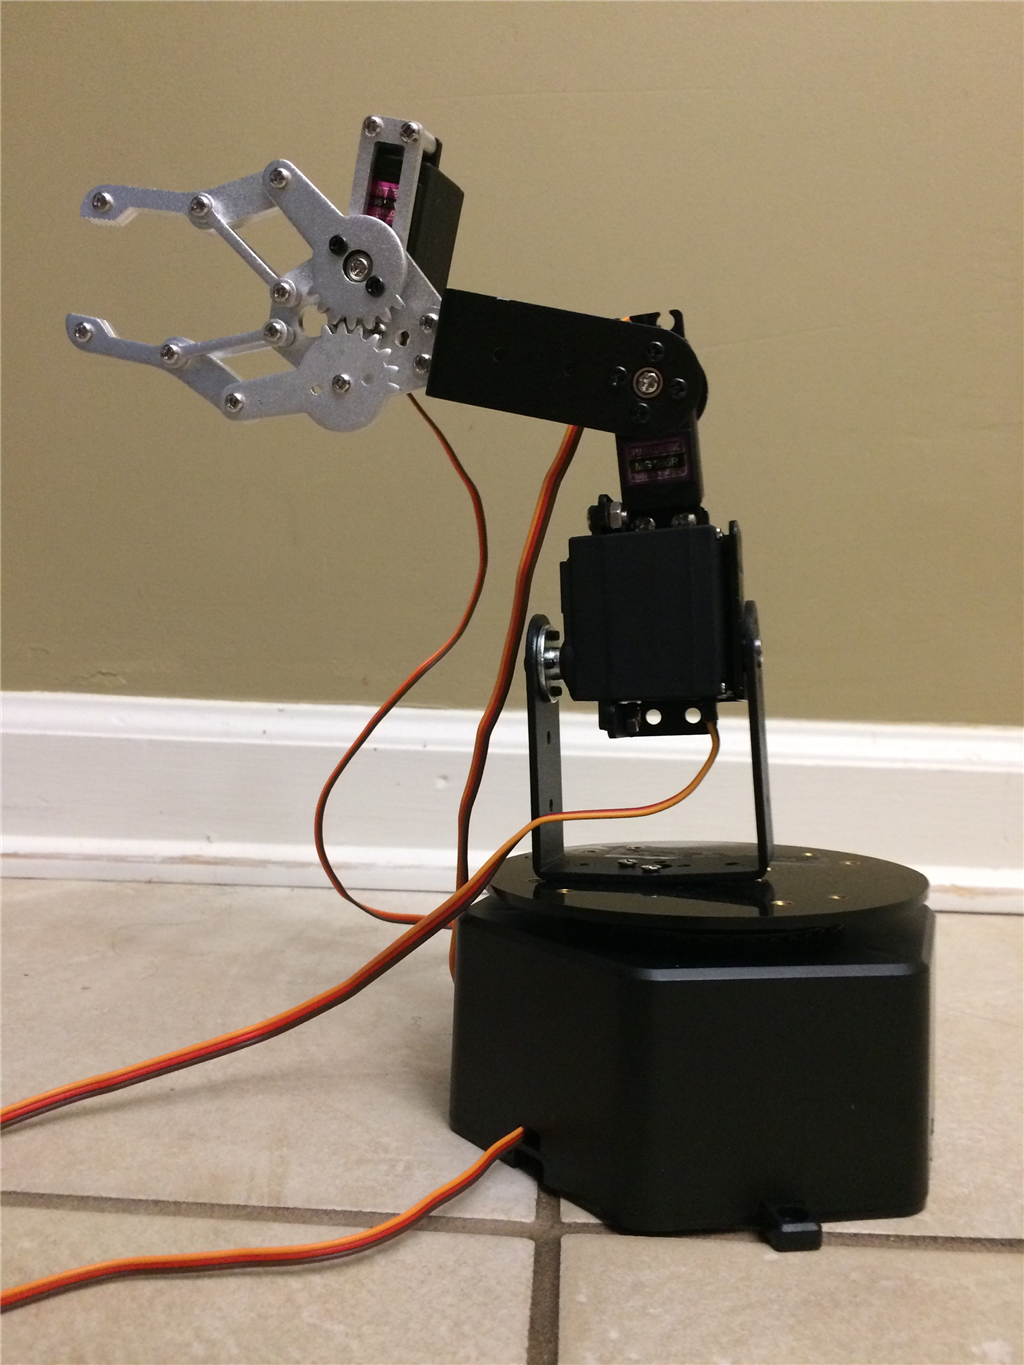 Ezang's My New Robot Arm On Ez- Builder - Video Next Week - He Has A Gripping Personality 